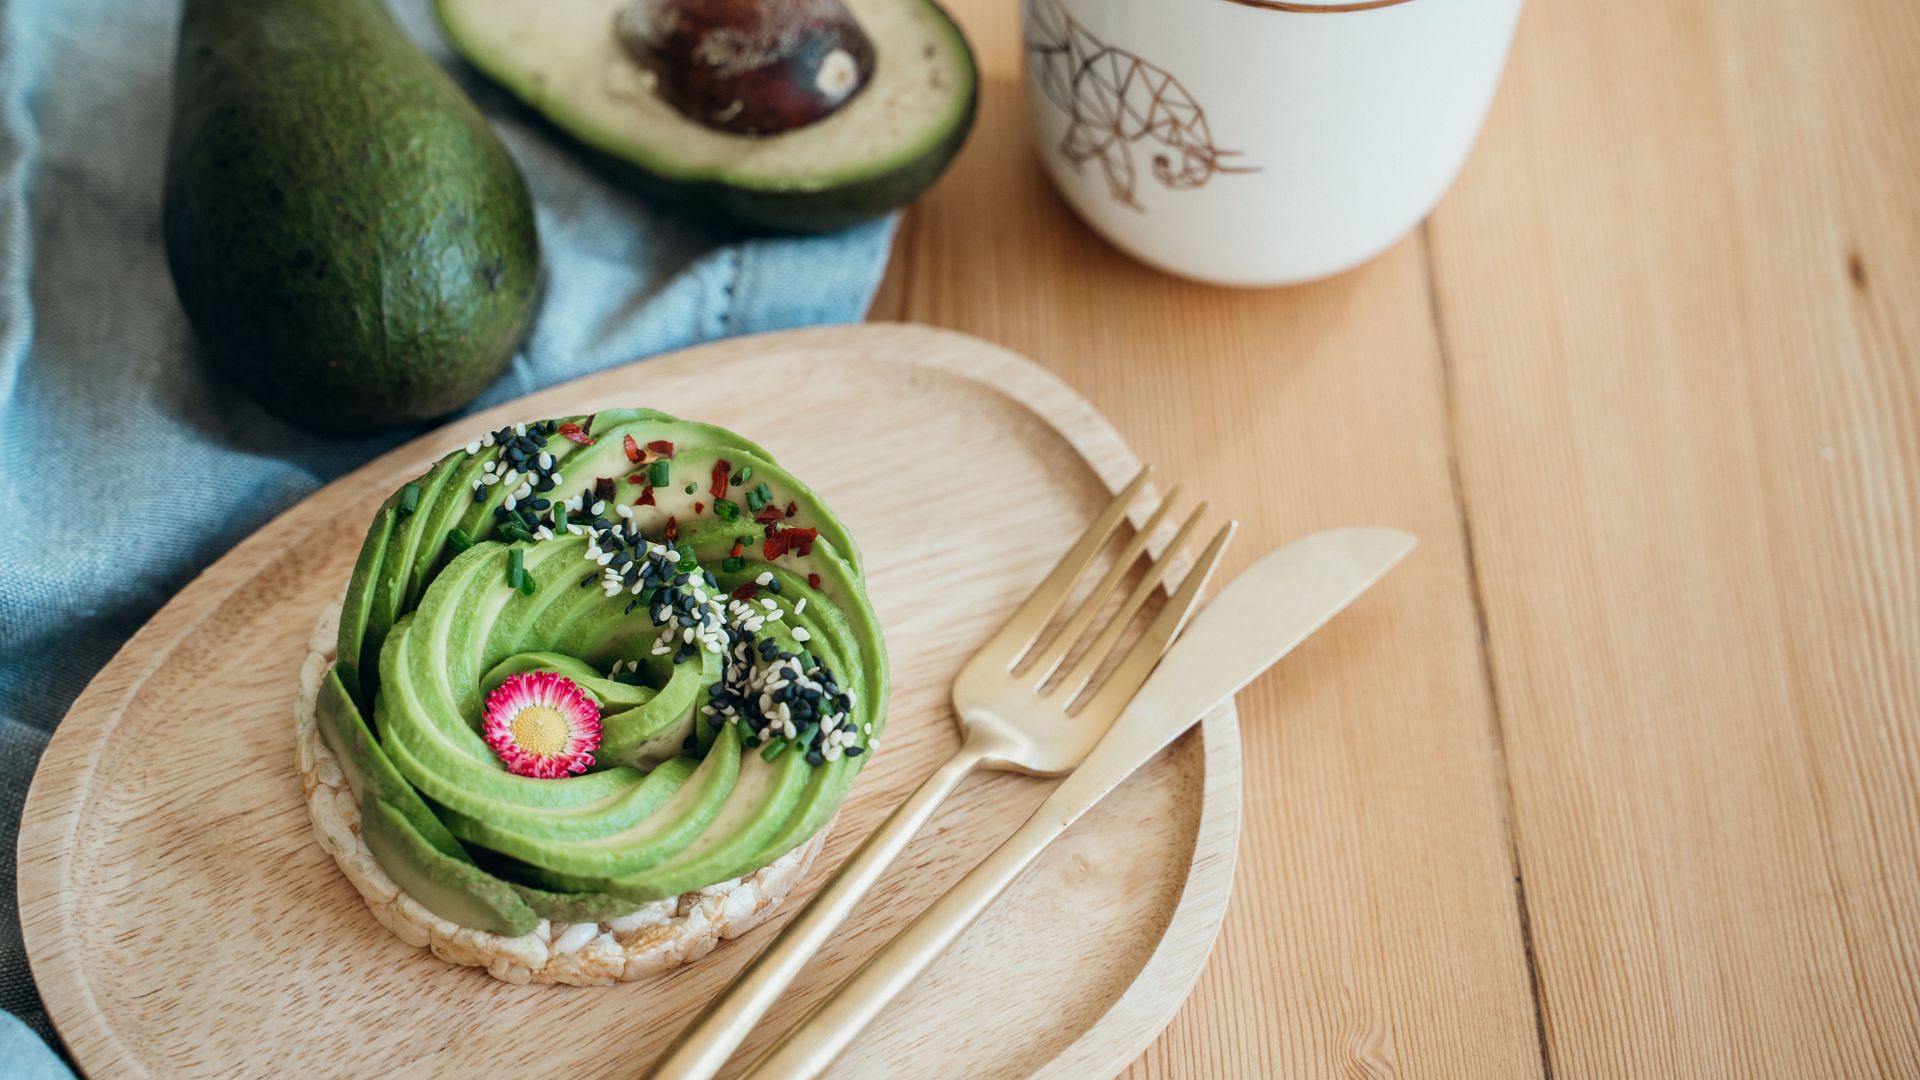 Dark chocolate, avocado, herbal tea, nuts, salmon, leafy greens, and berries are some of the best calming foods for emotional well-being. (image via pexels)